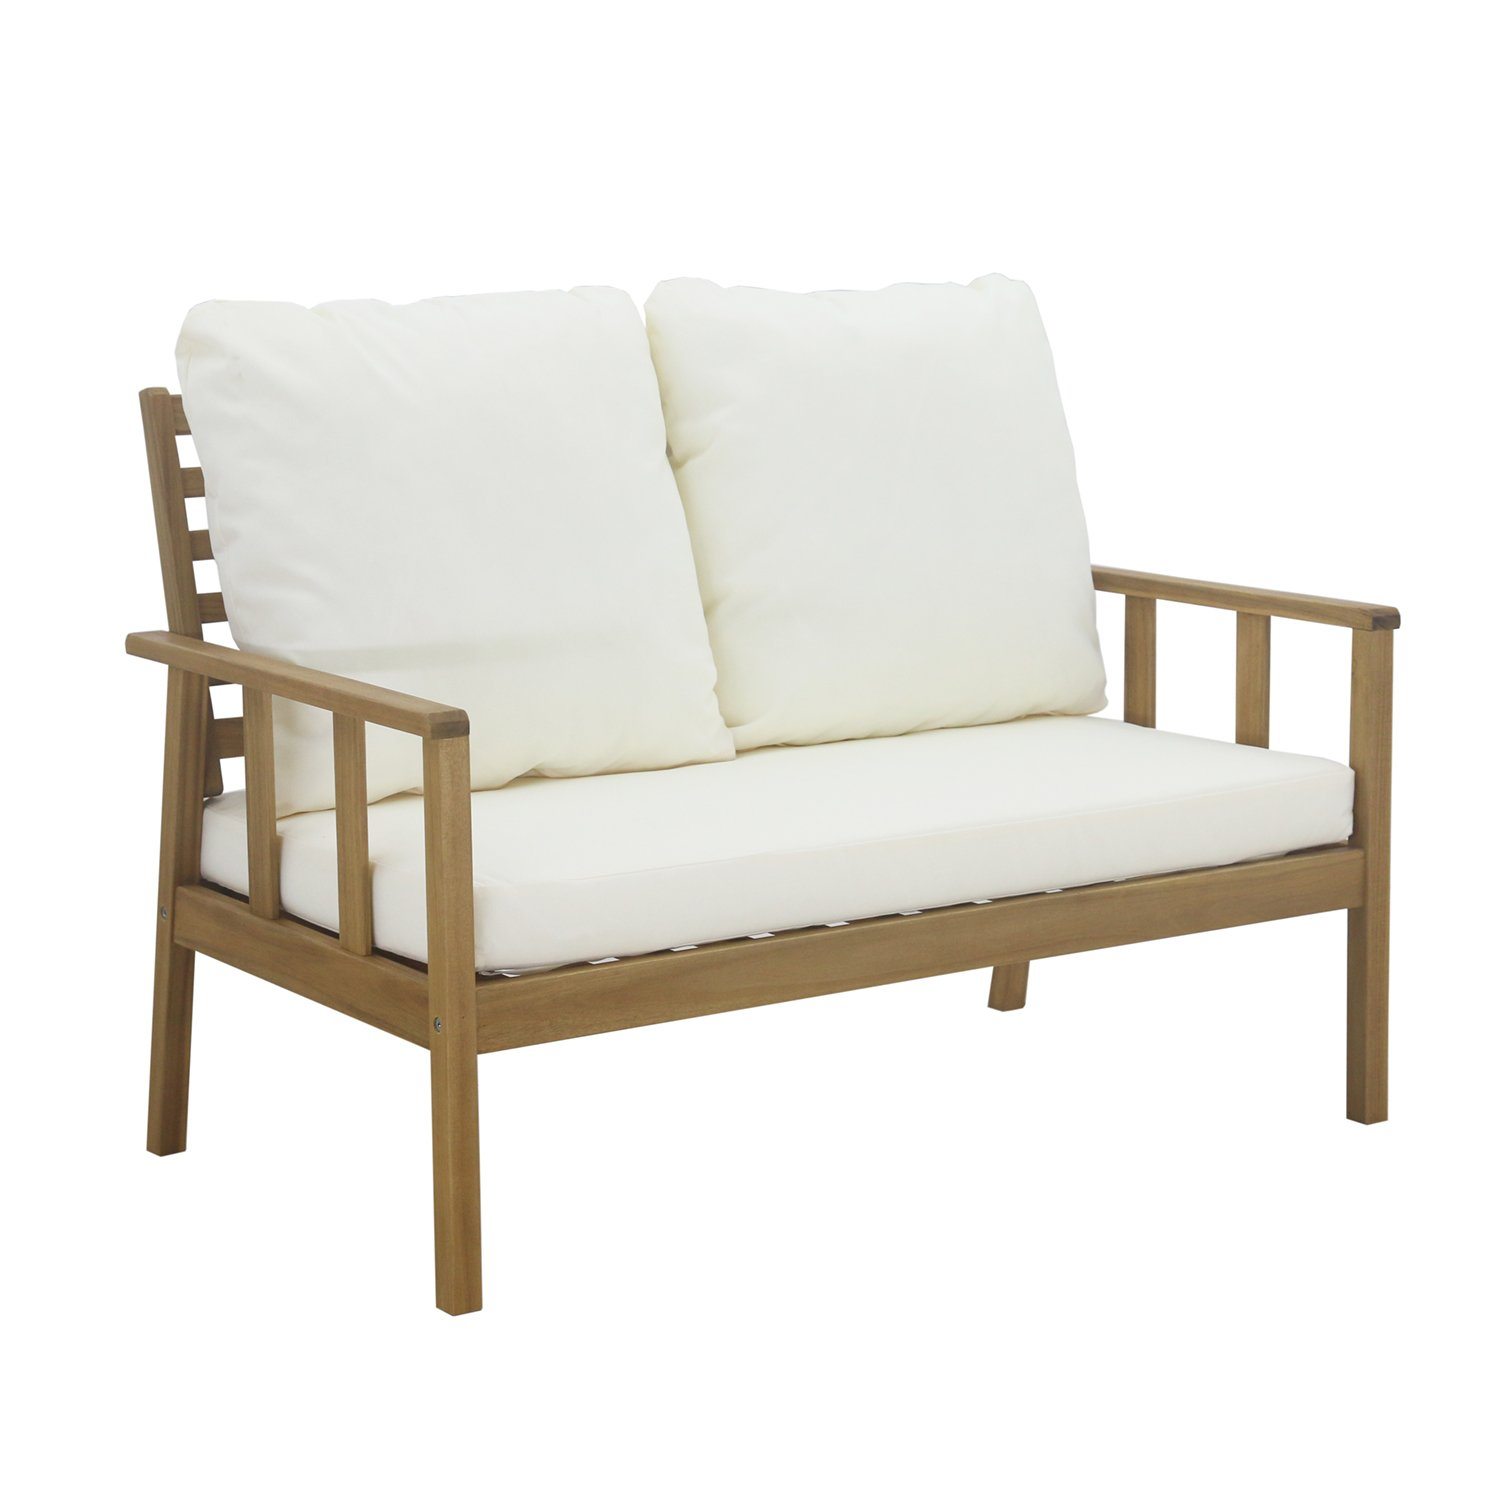 Harrelson outdoor sofa set with cream lean over parasol - solid wood and Natural